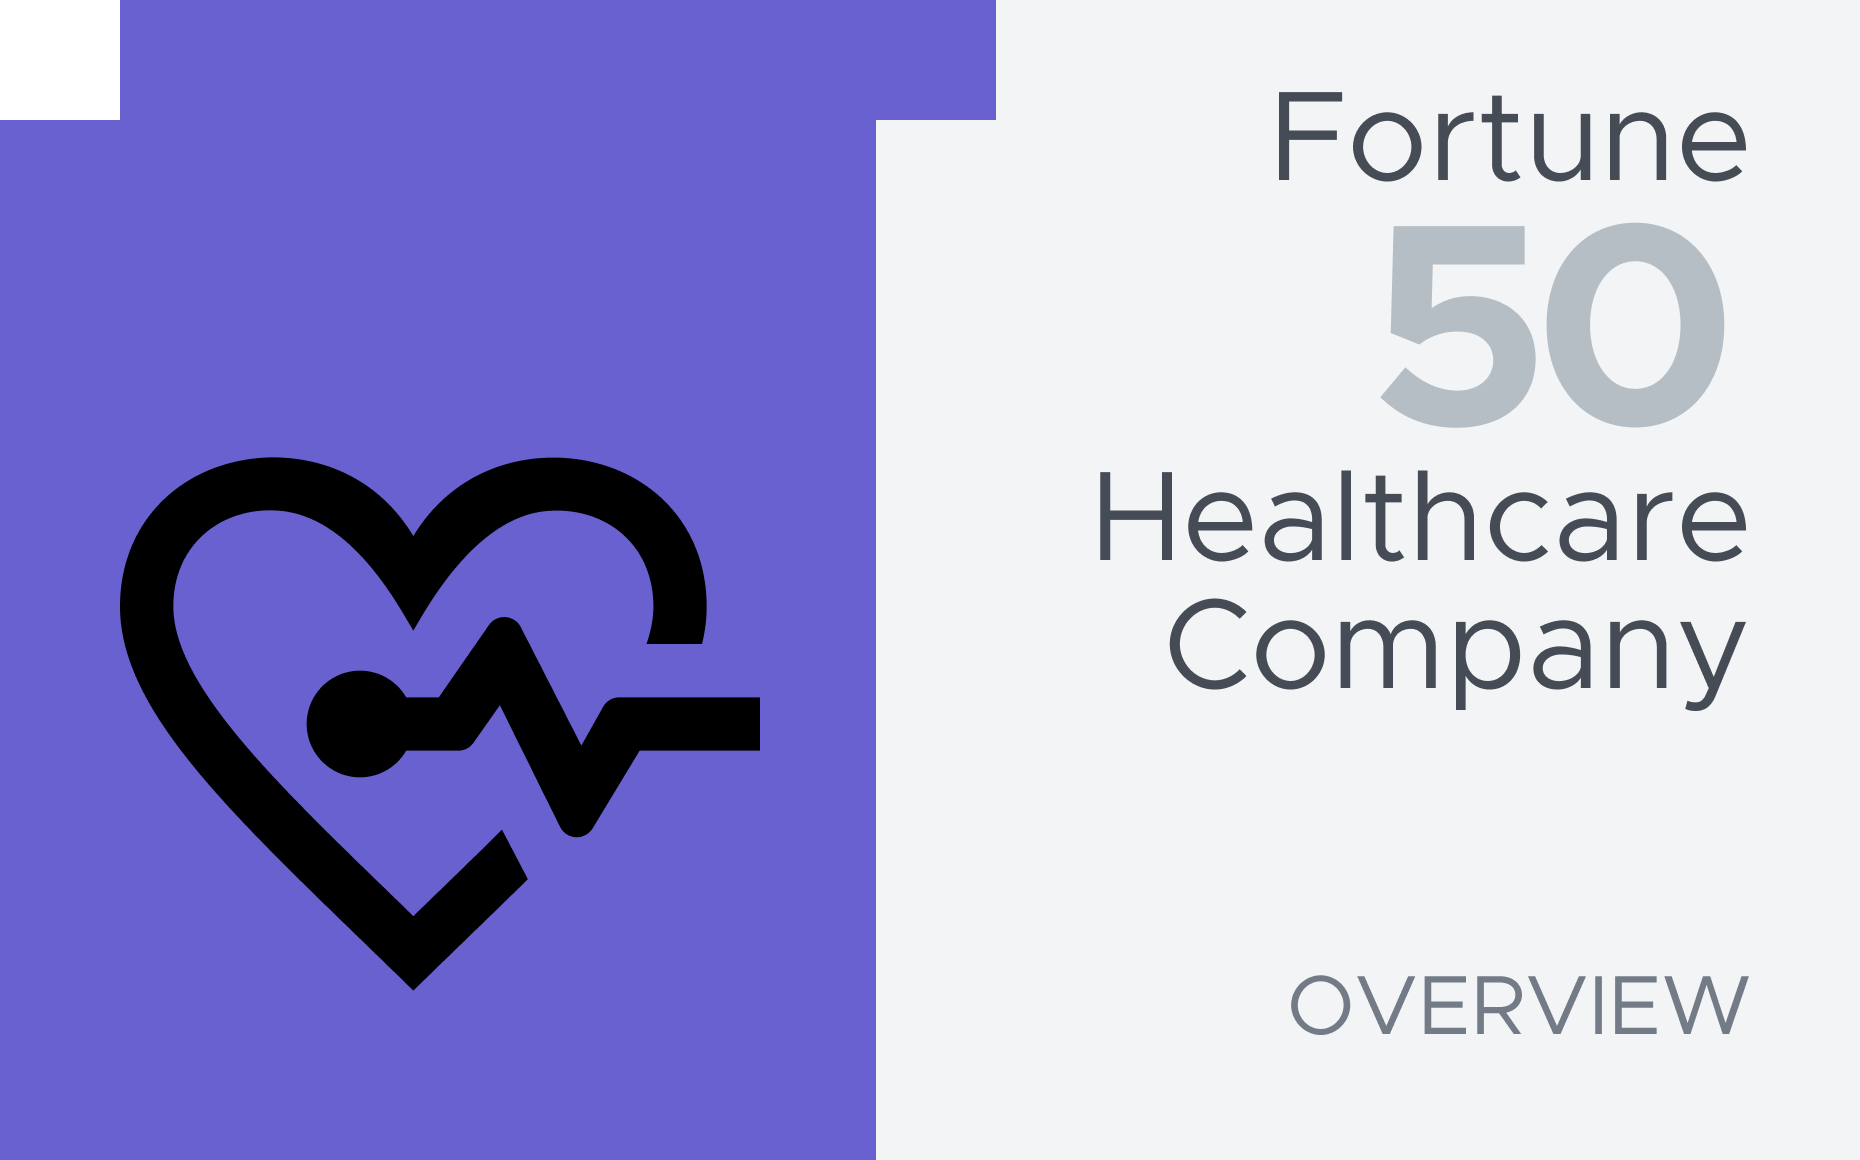 Fortune 50 Healthcare Company Uses bipp to Boost Business Intelligence Performance and Reduce Costs